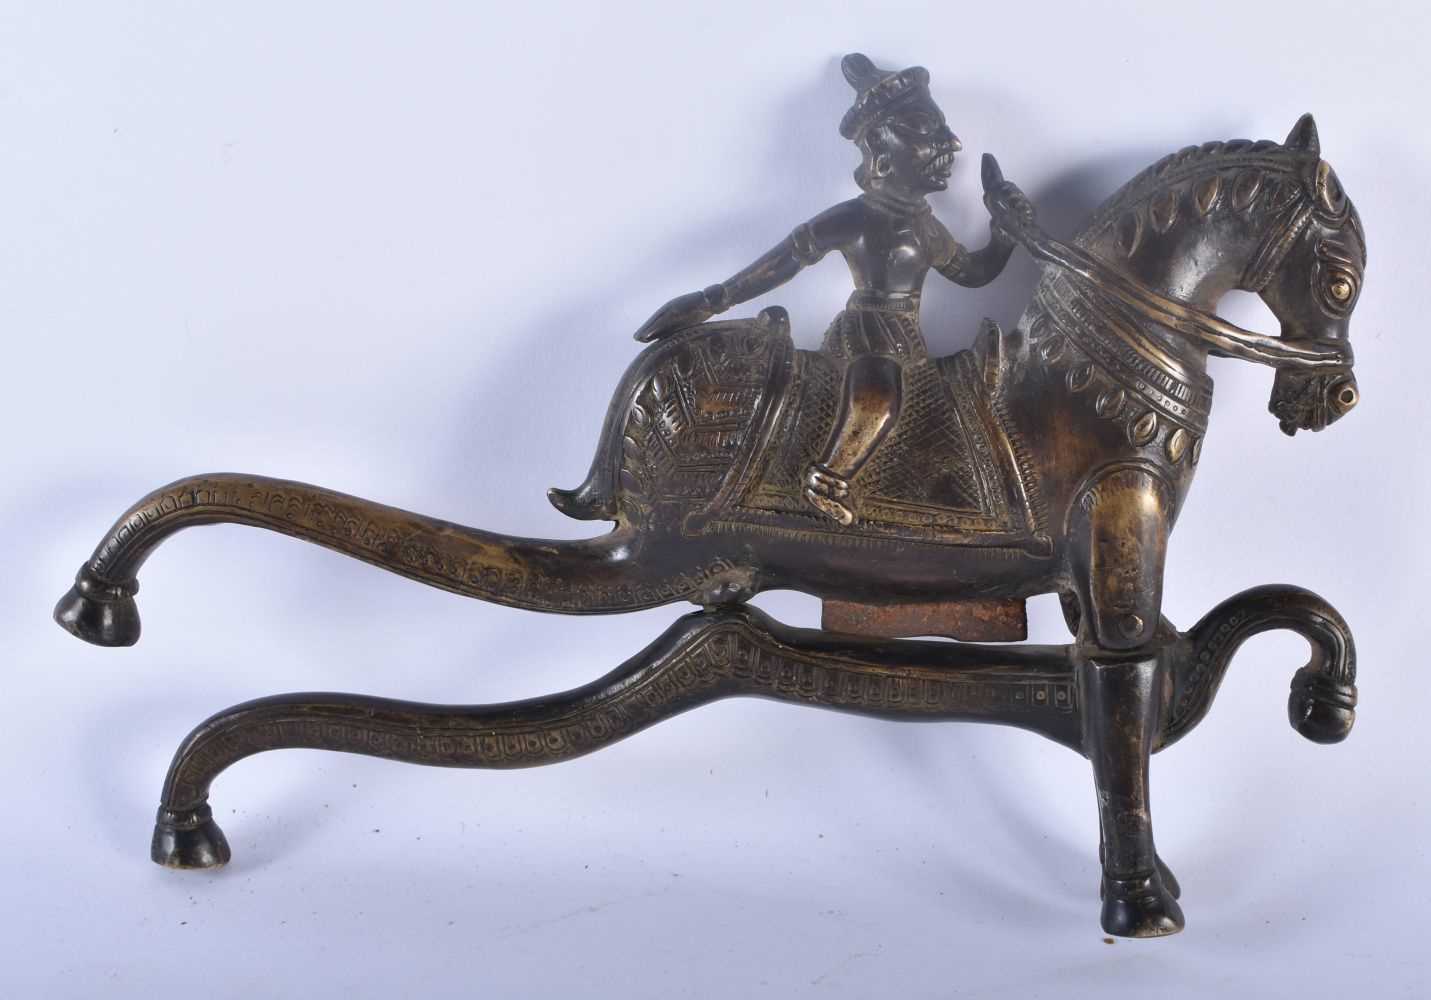 A VERY UNUSUAL LARGE 18TH/19TH CENTURY MIDDLE EASTERN INDIAN BRONZE BEETLE NUT CRACKER modelled as a